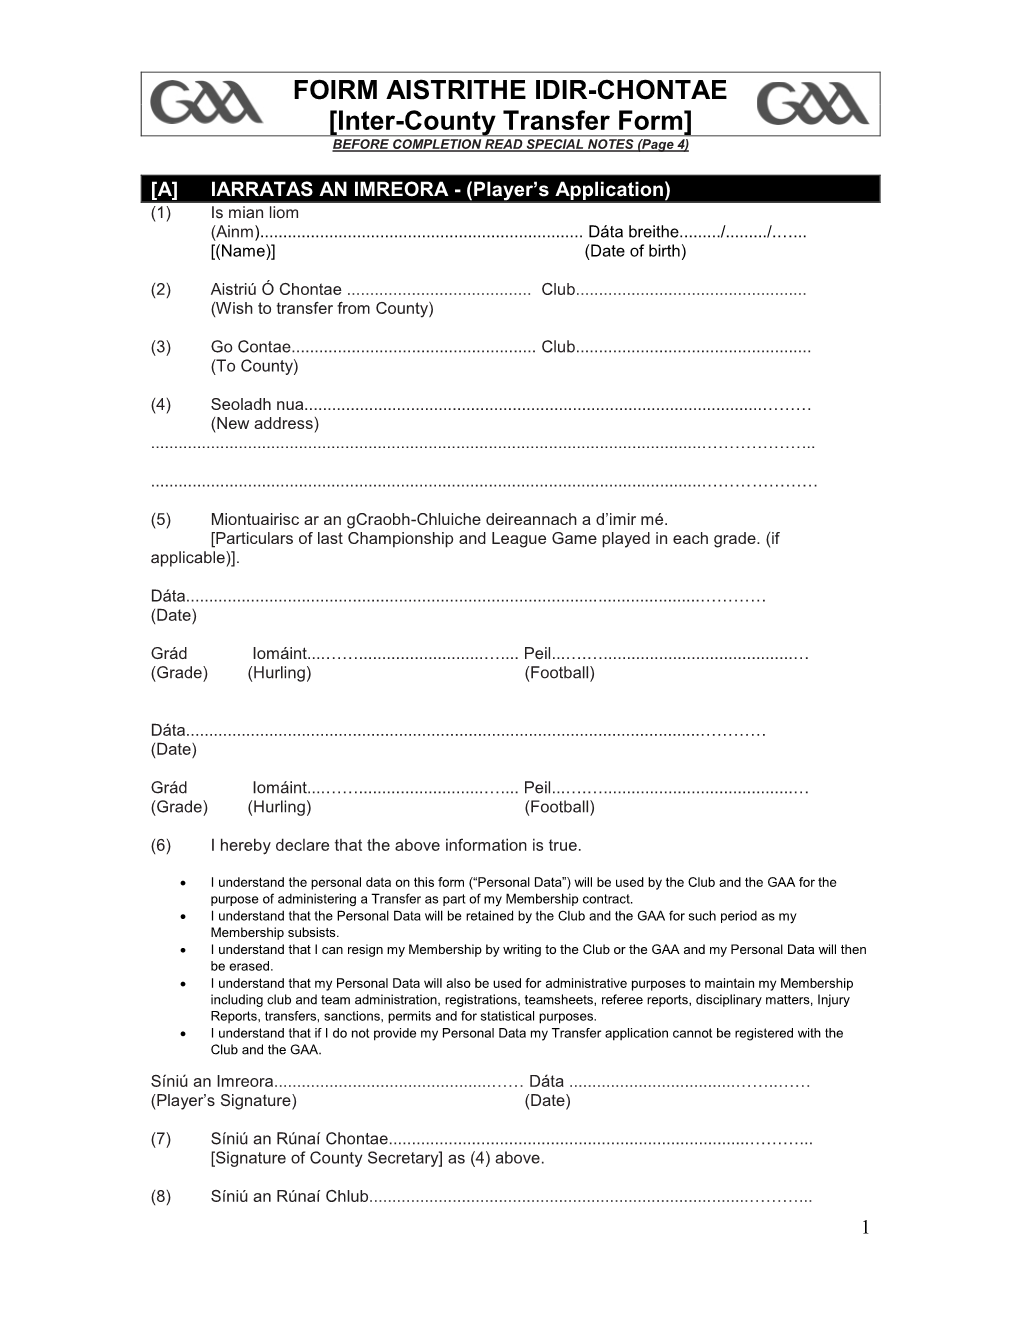 FOIRM AISTRITHE IDIR-CHONTAE [Inter-County Transfer Form] BEFORE COMPLETION READ SPECIAL NOTES (Page 4)